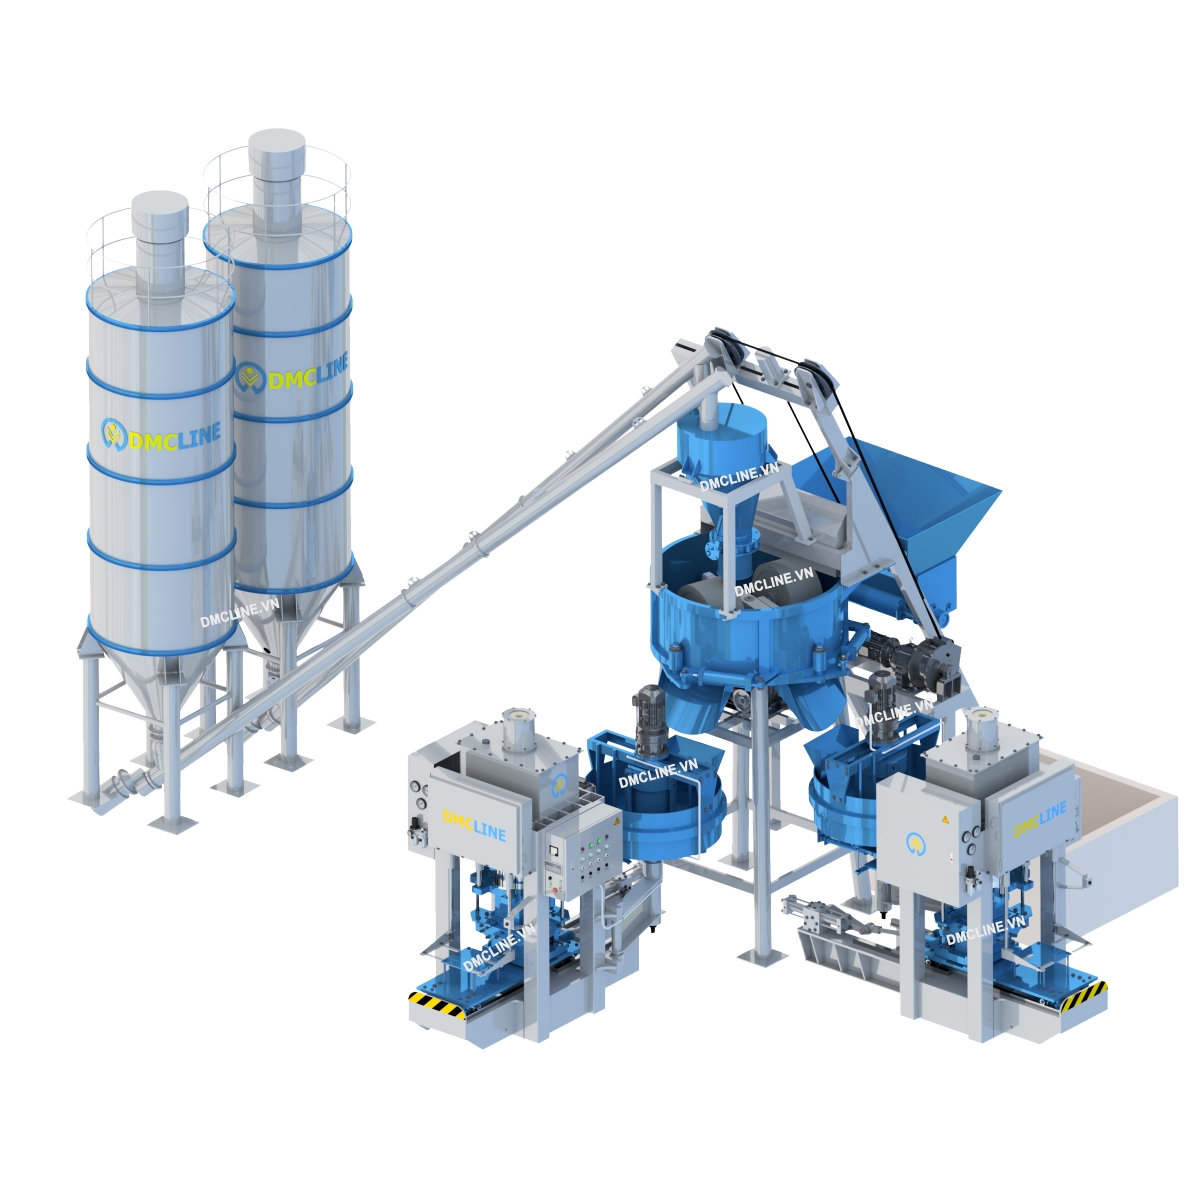 Production scale with 2 cement tile making machines